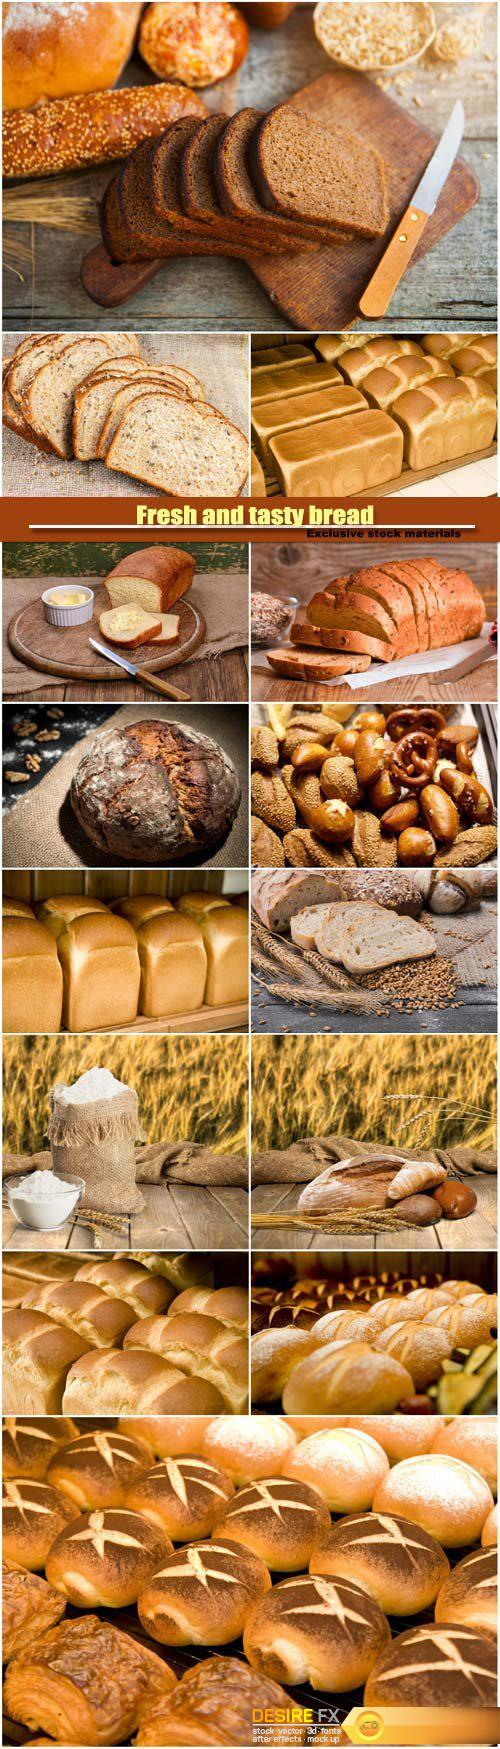 Fresh and tasty bread, various pastry and bakery